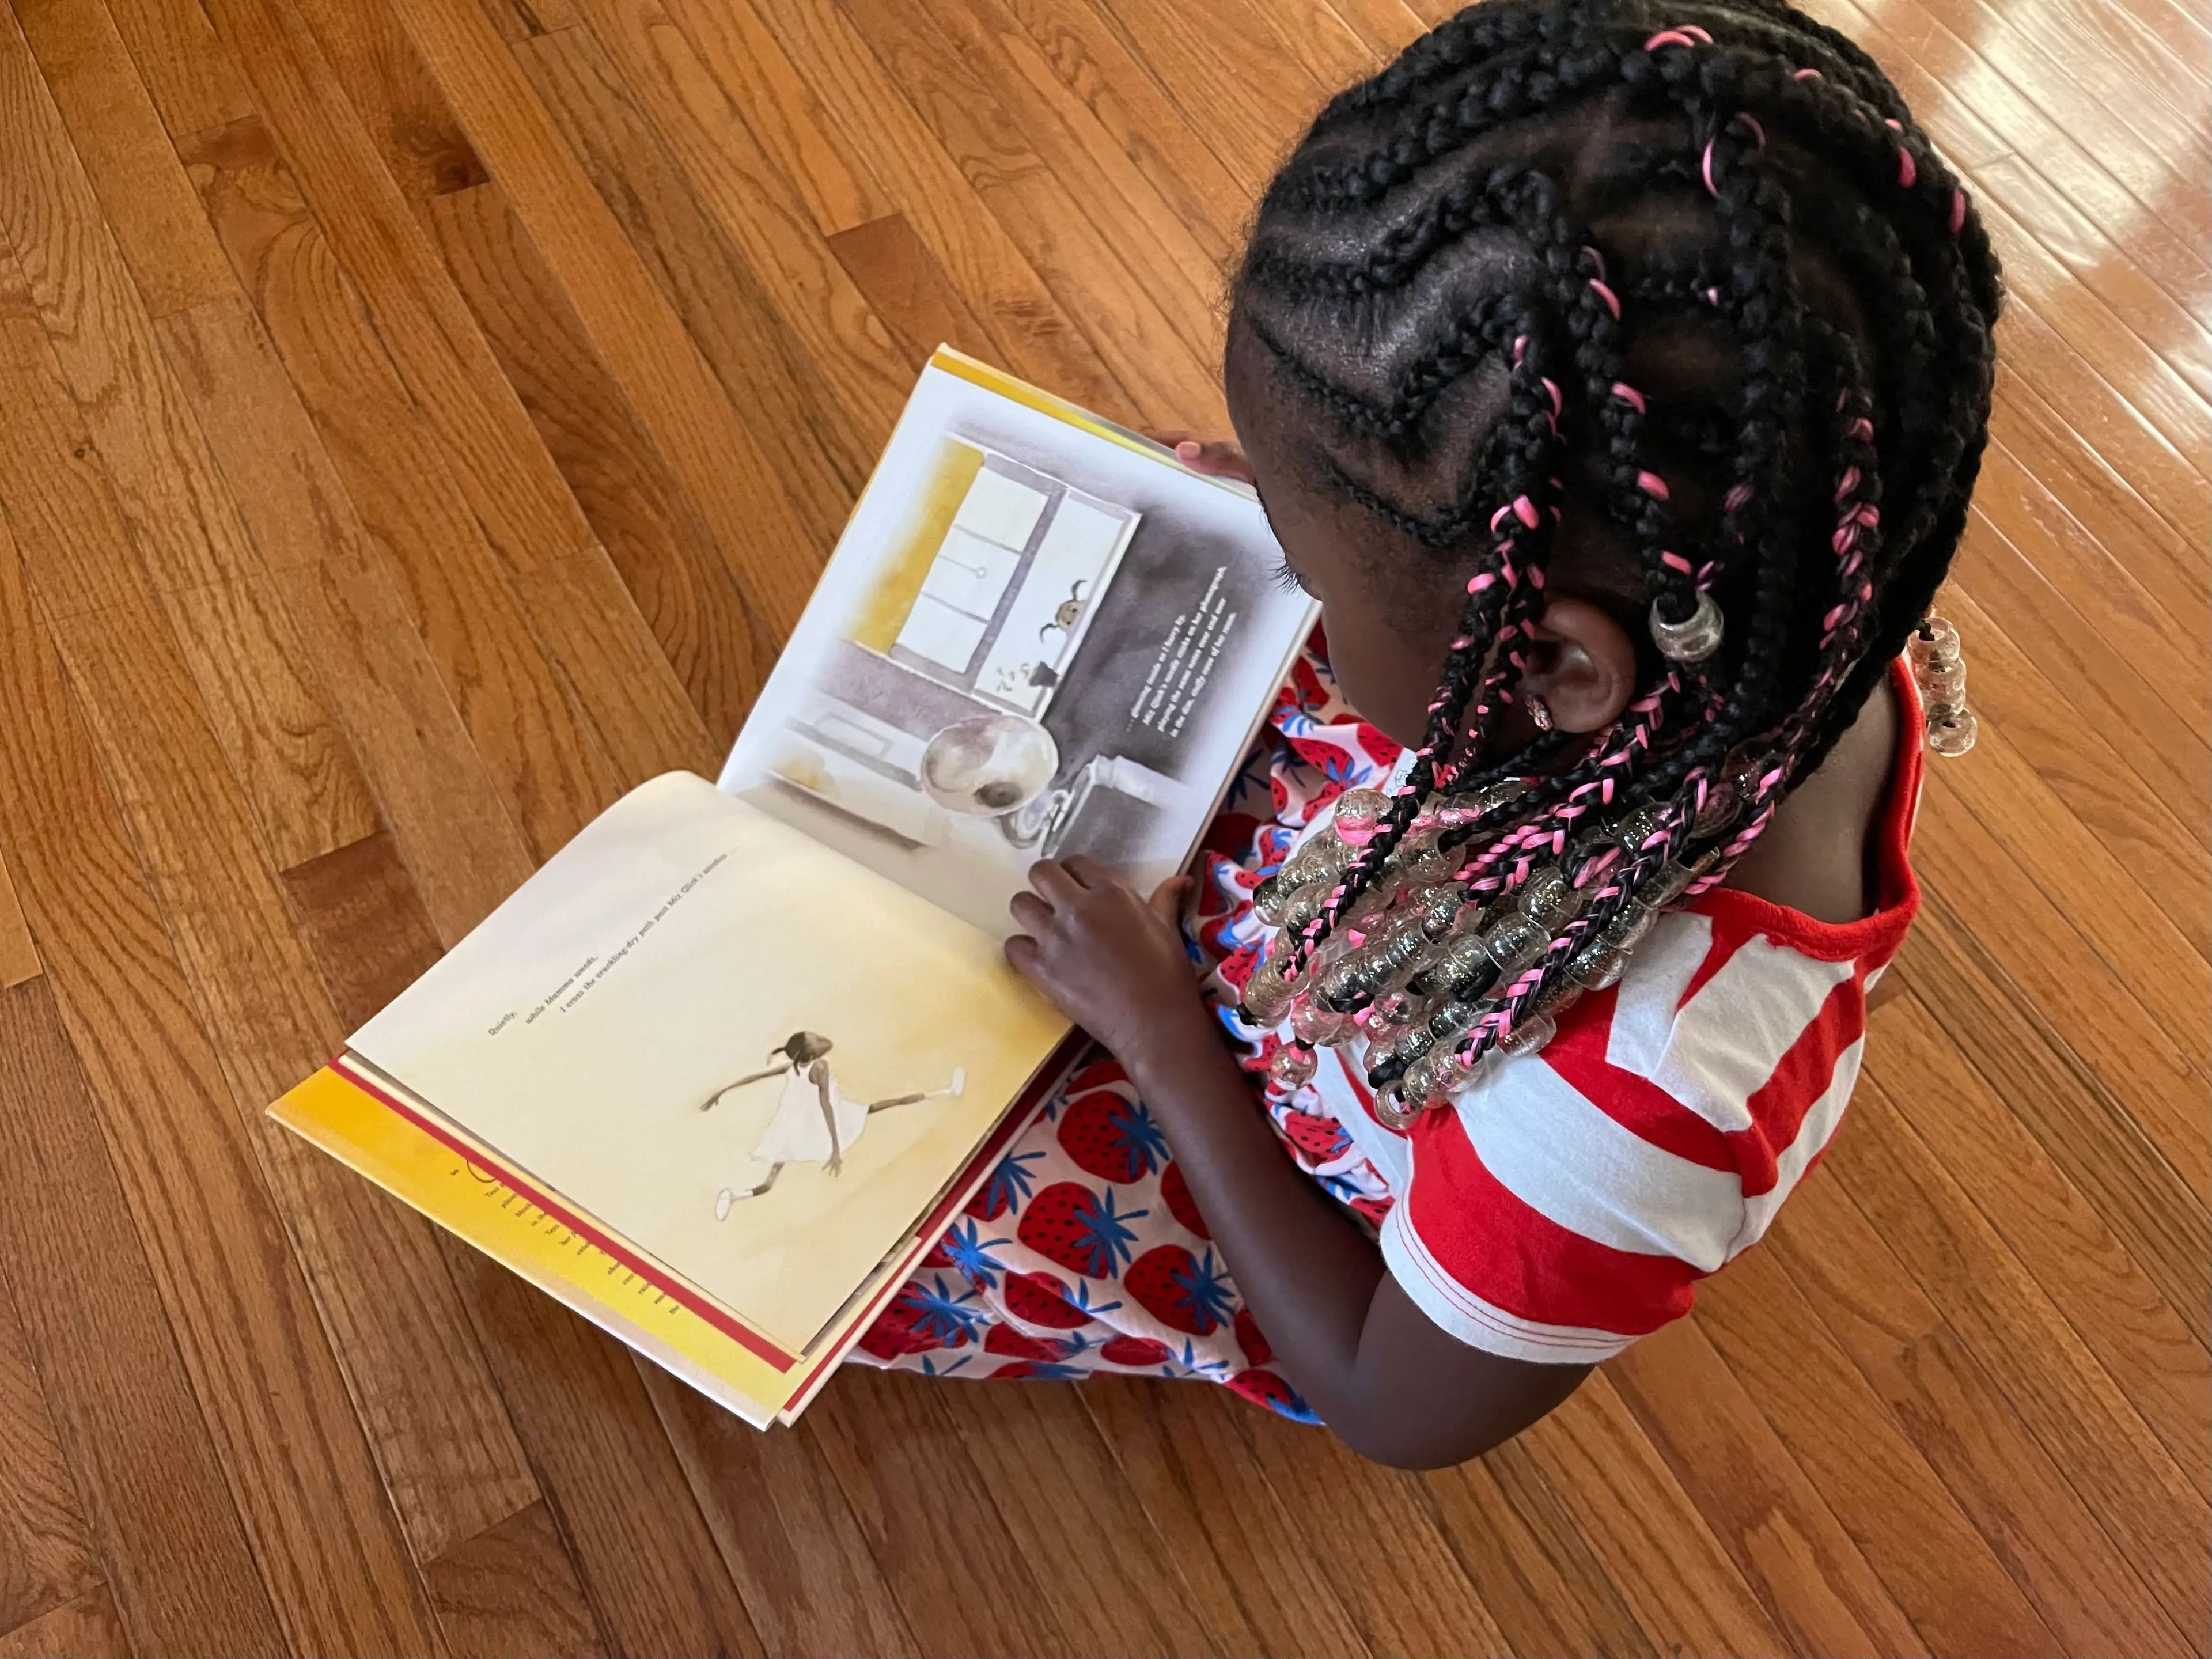 One of Rachel Garlinghouse's kids reading a book